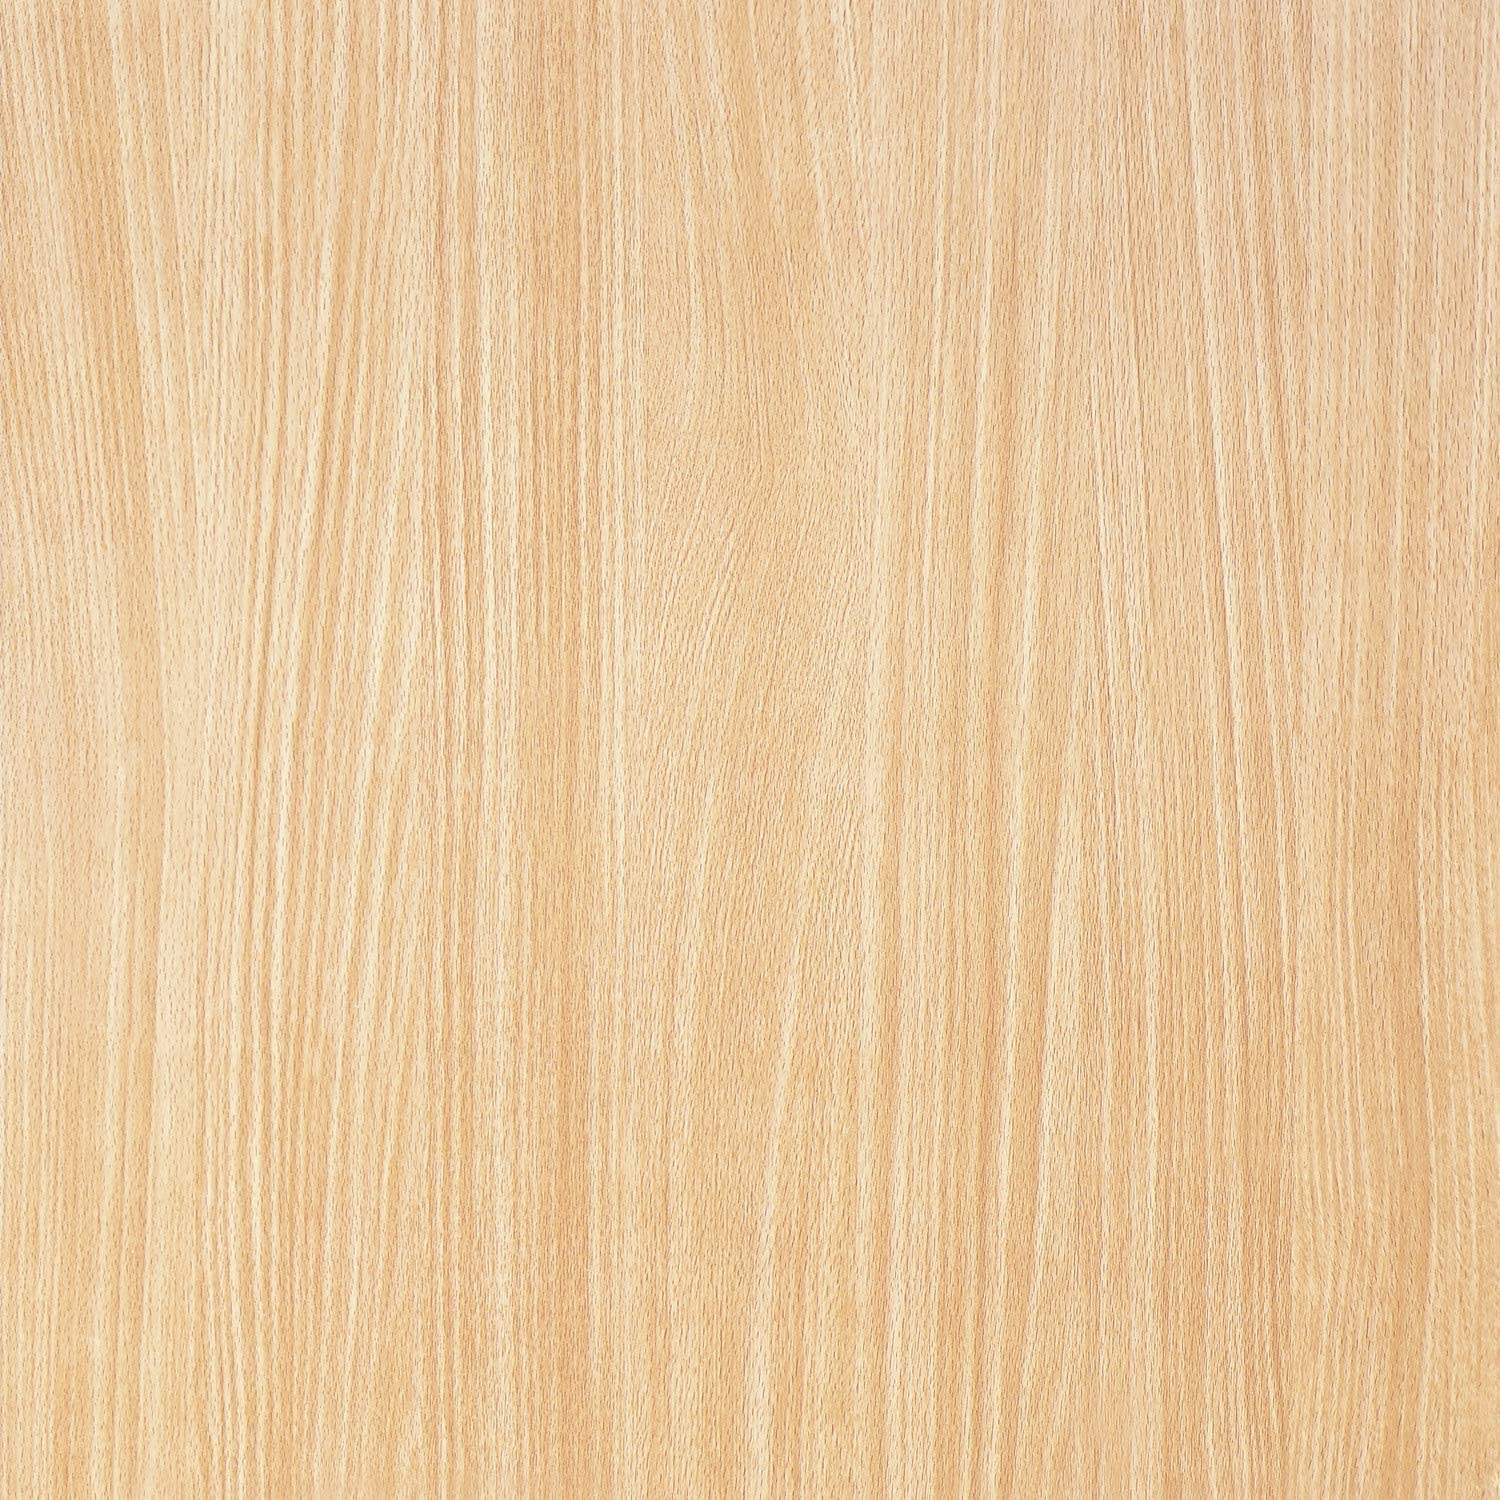 Wood Contact Paper for Cabinets Natural Wood Grain Contact Paper Light Wood Wallpaper Peel and Stick Wallpaper Film Kitchen Cabinet Shelf Drawer Liner Mapel Vinyl Decorative Roll 17.7”x78.7: Home Improvement